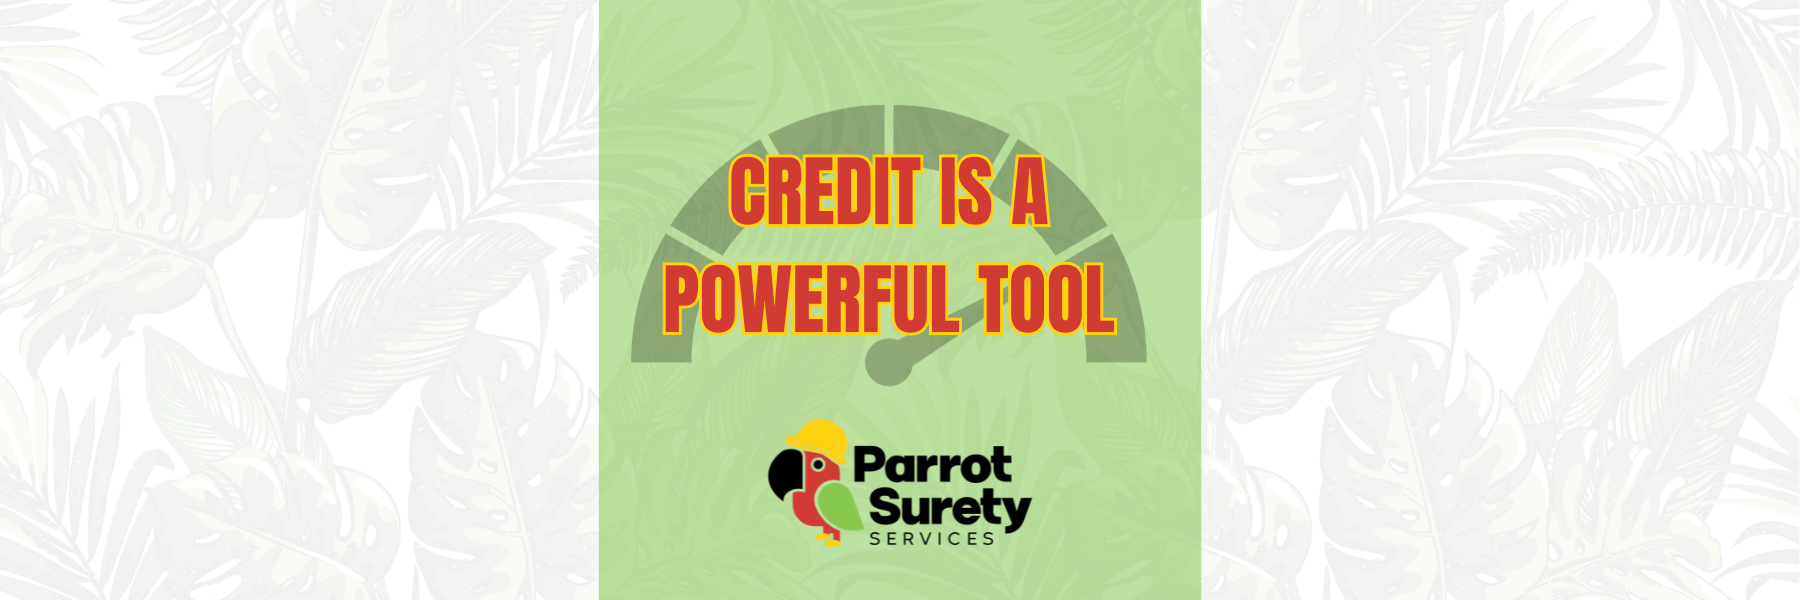 Credit is a Powerful Tool title image parrot surety services